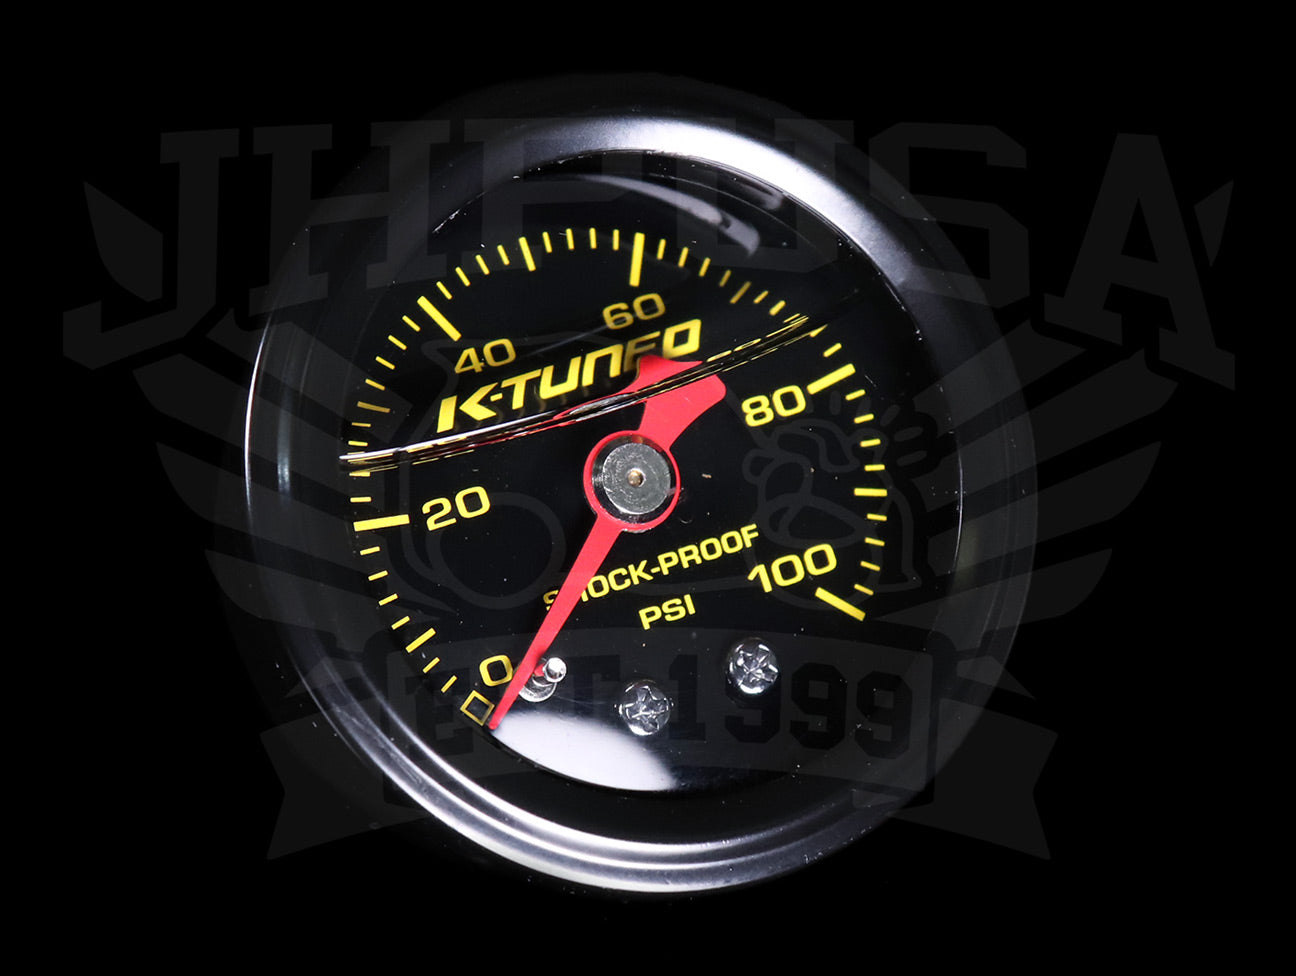 100 PSI Liquid Filled Fuel Pressure Gauge 0-100 PSI WITH Adapter for H